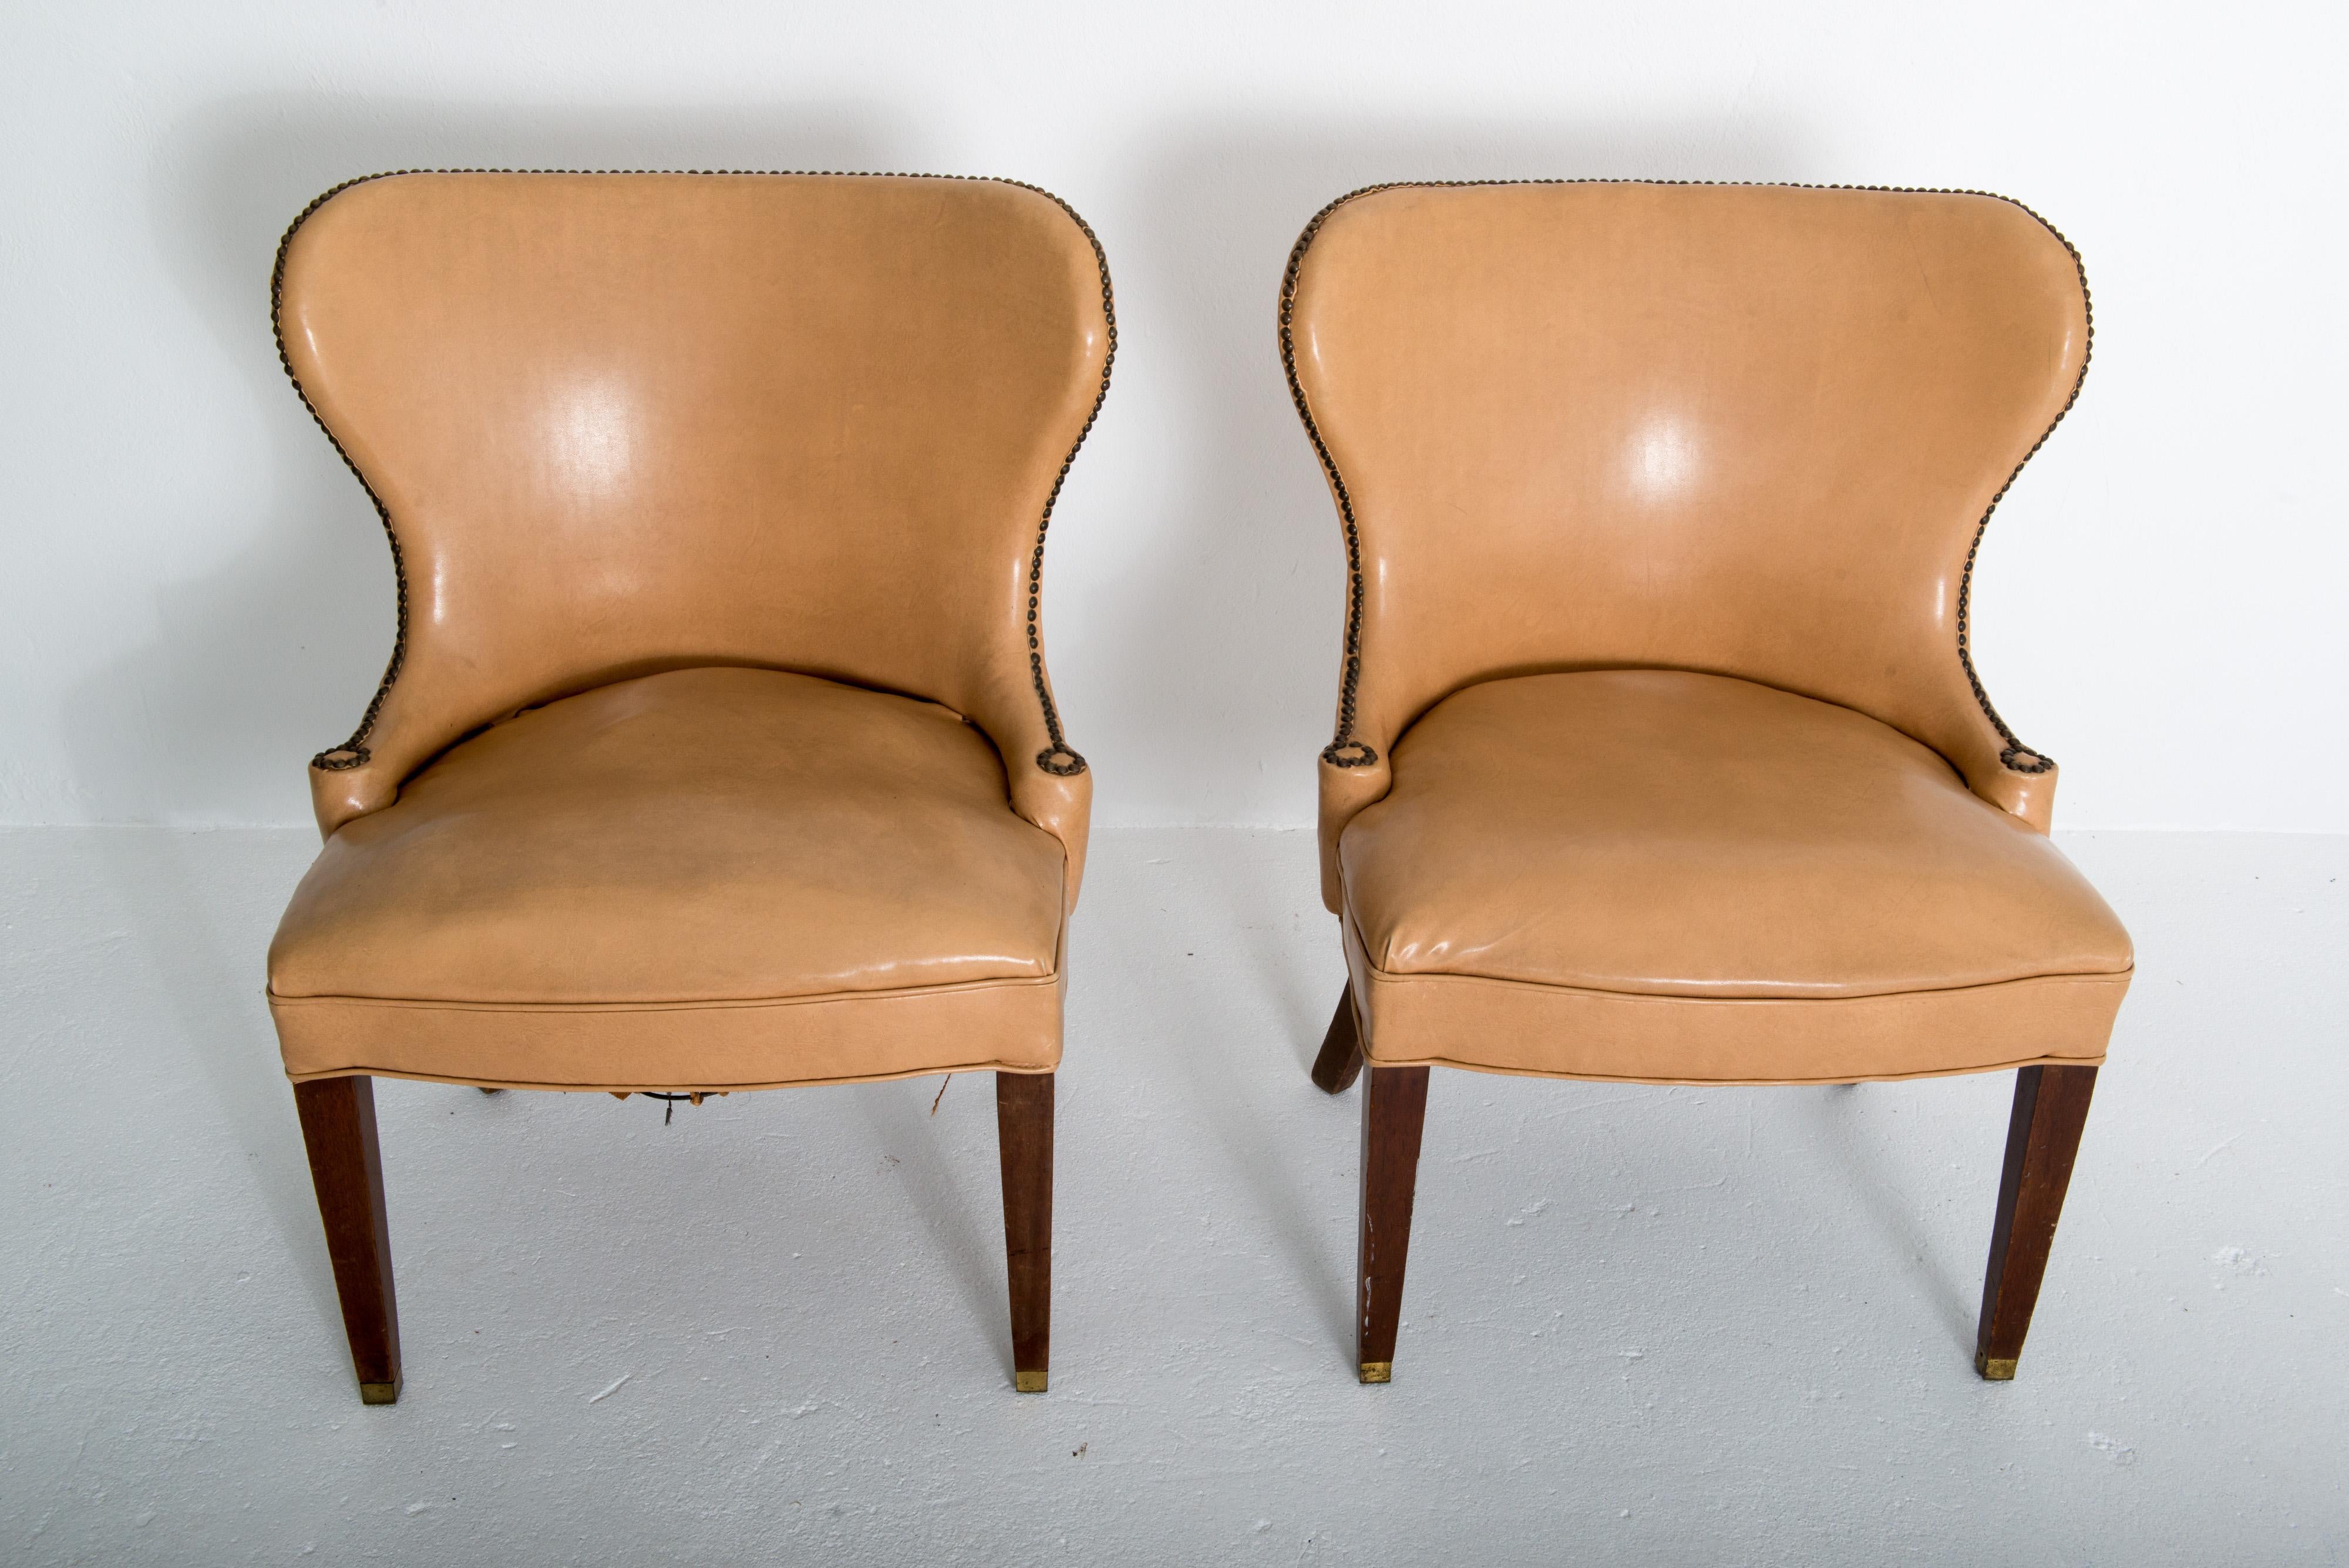 This is a pair of stunning Grosfeld House club chairs in the original beige-camel colored faux leather, nail head studded upholstery. They are roomy, comfortable, and substantial yet sculptural and stylish. Legs are smooth tapered stained hardwood.